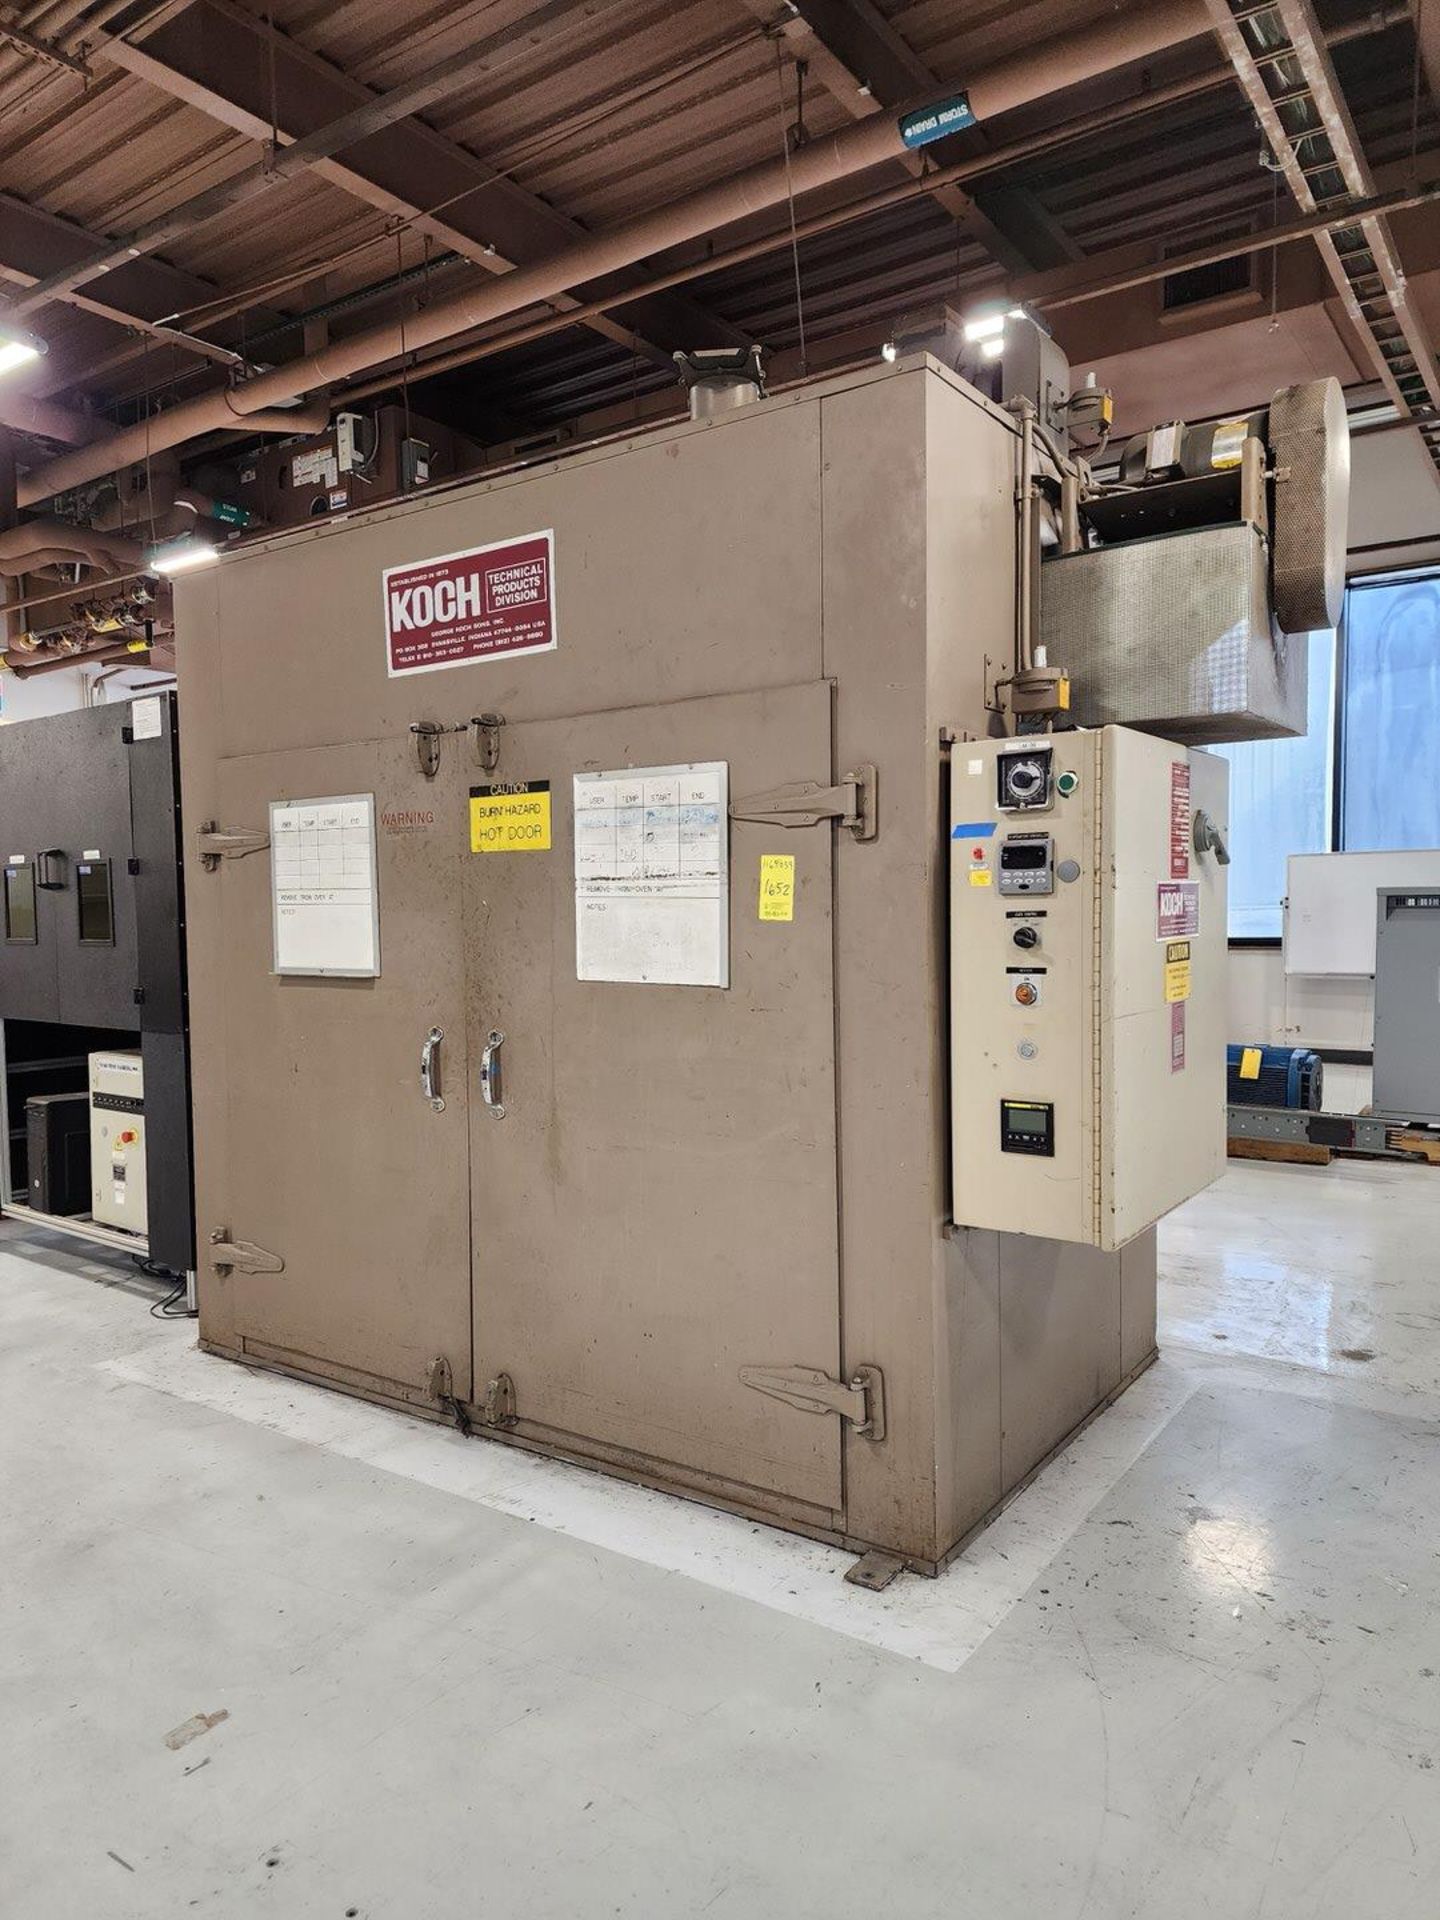 Koch HBE-645 Batch Oven Max Temp: 500F, Size: 6' x 4' x 5' (Asset# 116059 - Image 2 of 11